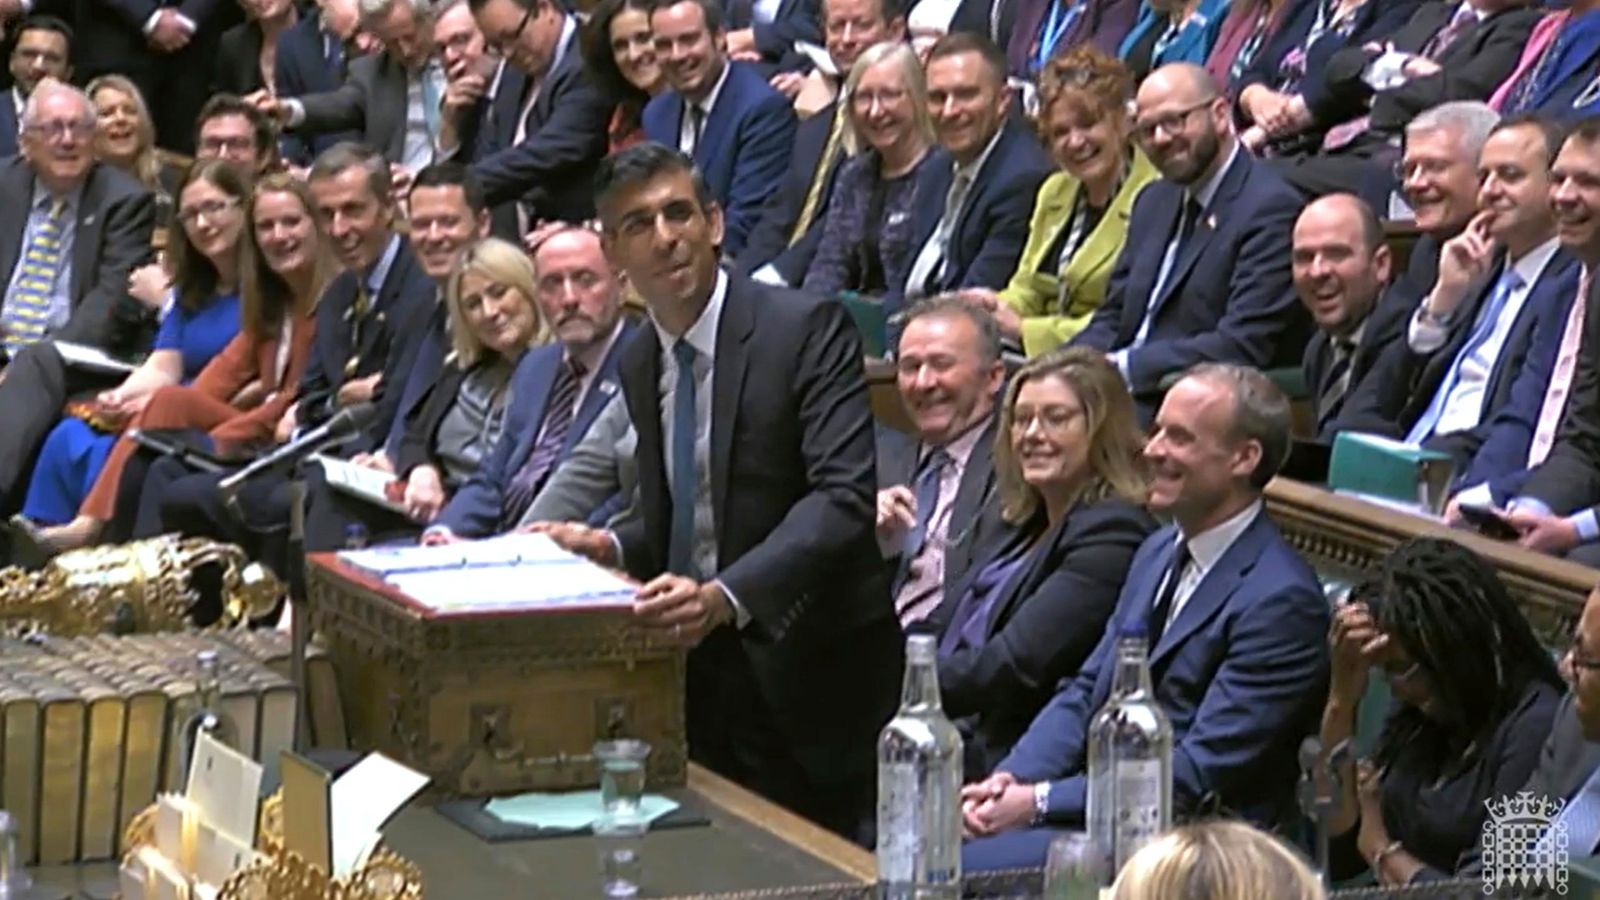 Rishi Sunak can't rock the boat - his political legitimacy in No 10 hangs by a thread